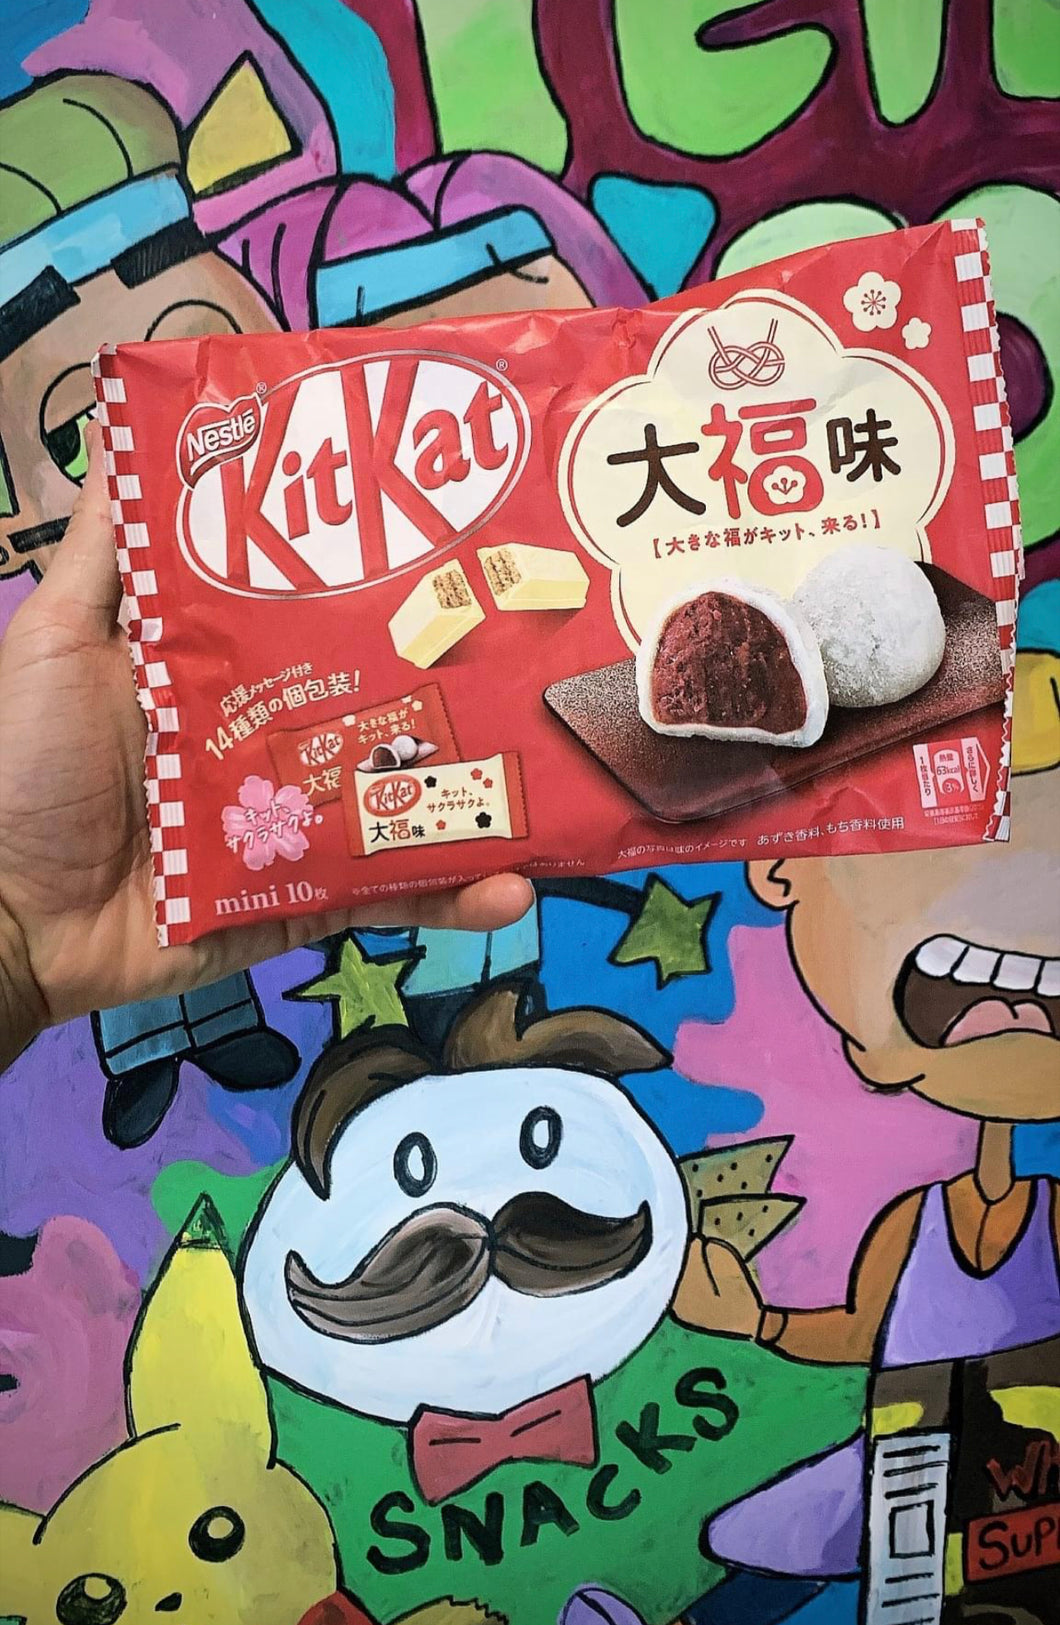 Kit Kat Collection - Caramel Pudding, Banana Caramel, Cookies & Cream, Peach, and Red Bean flavors to try!